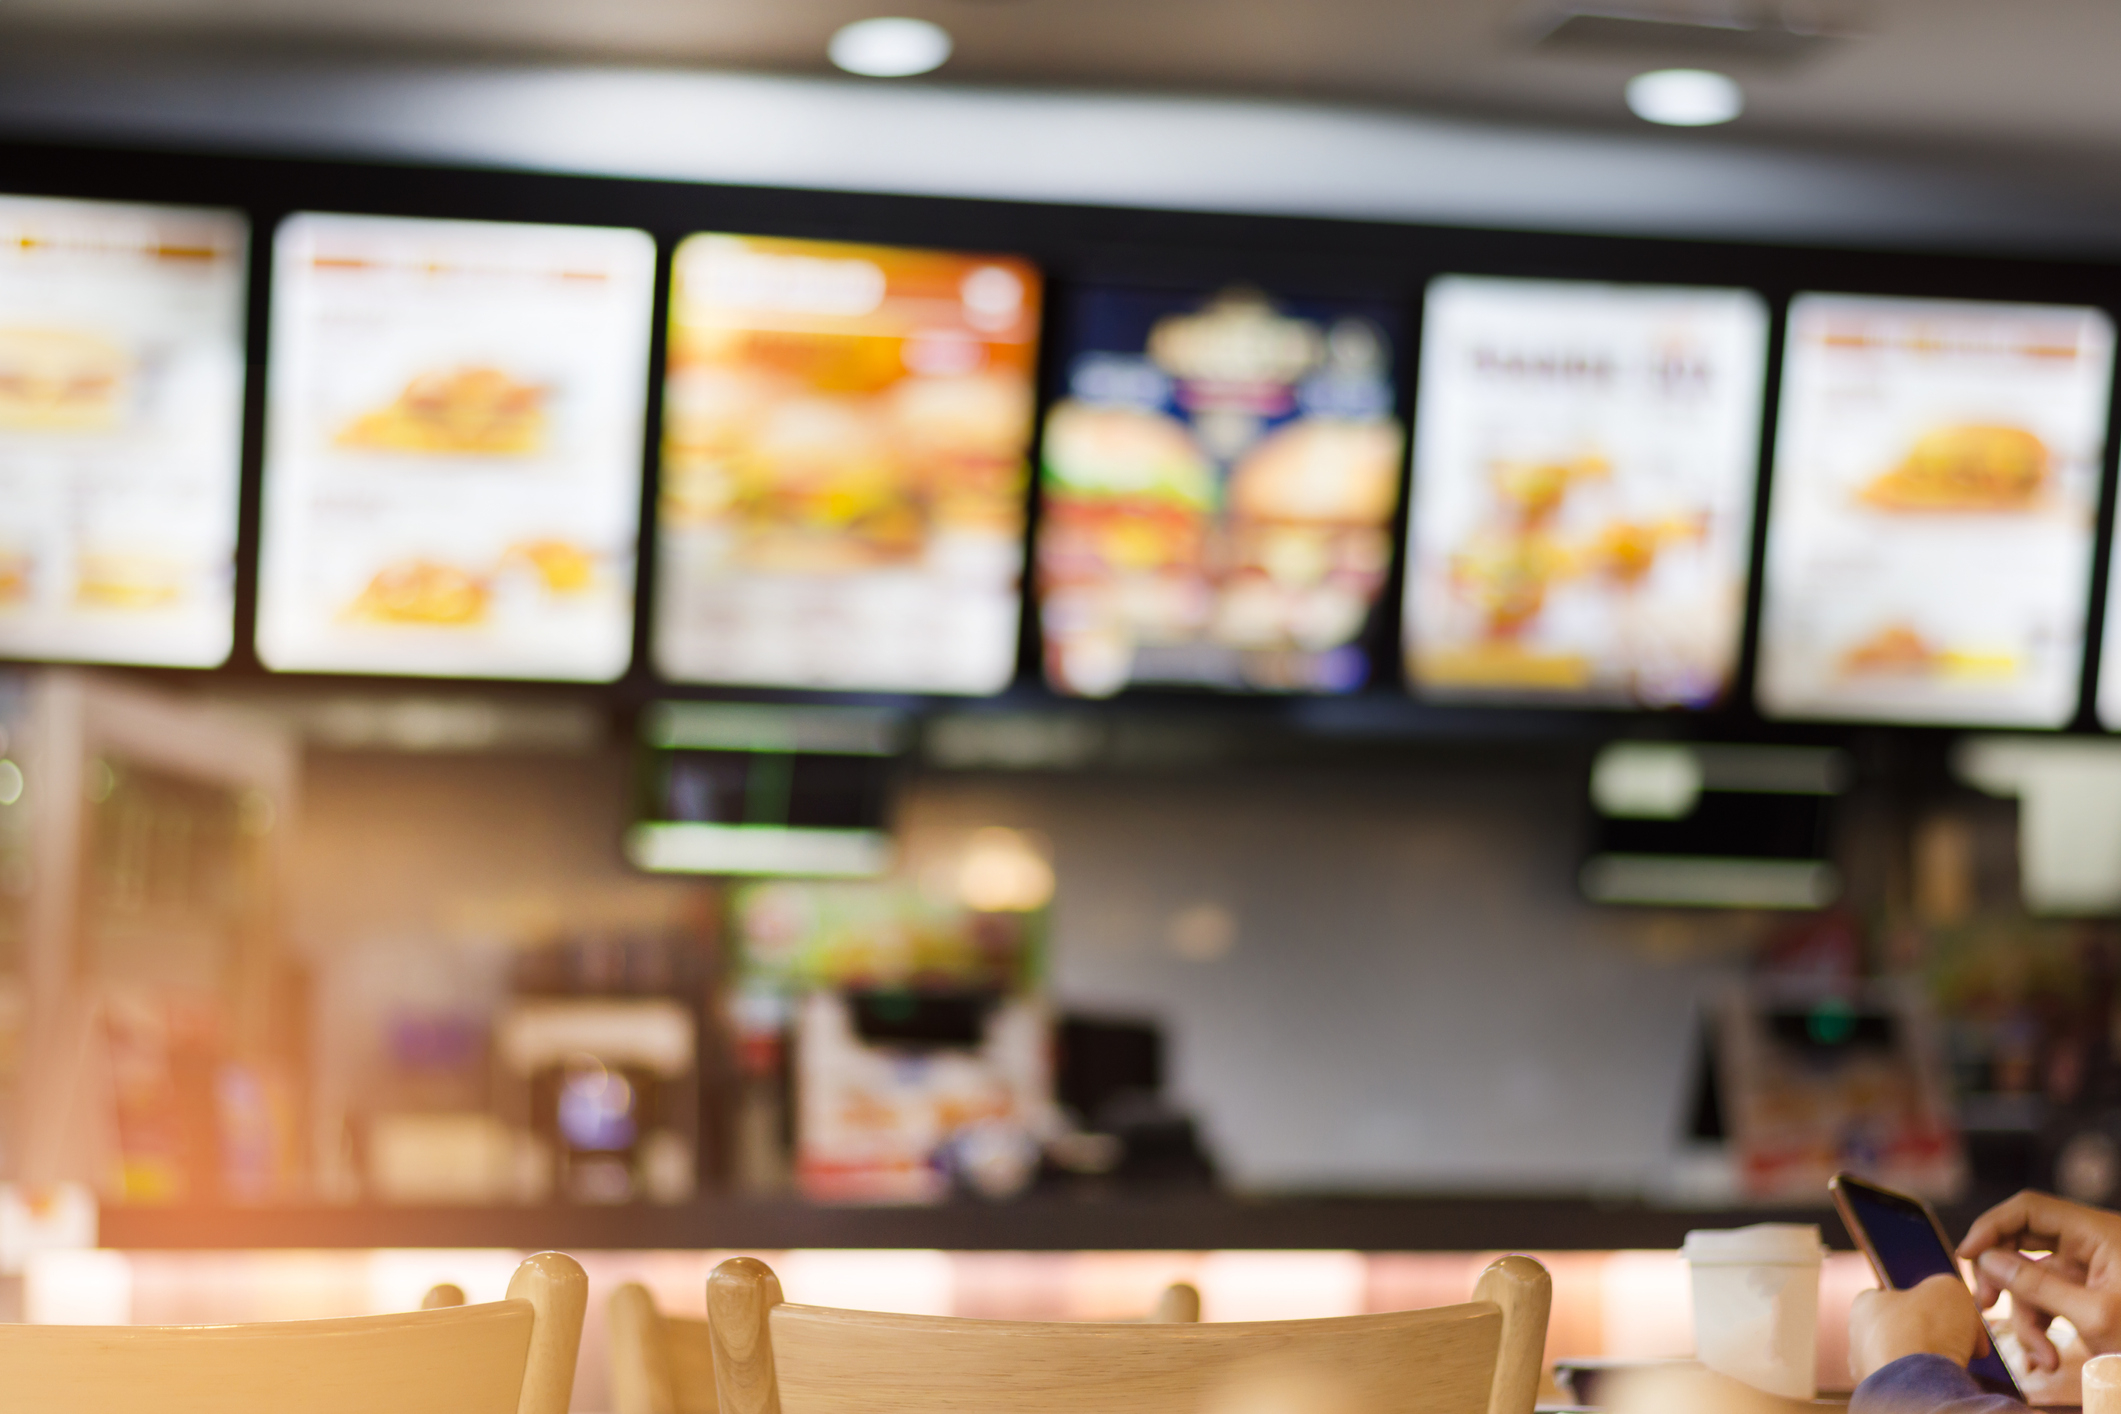 Fast food restaurant menu boards above counters, blurred with foreground seating